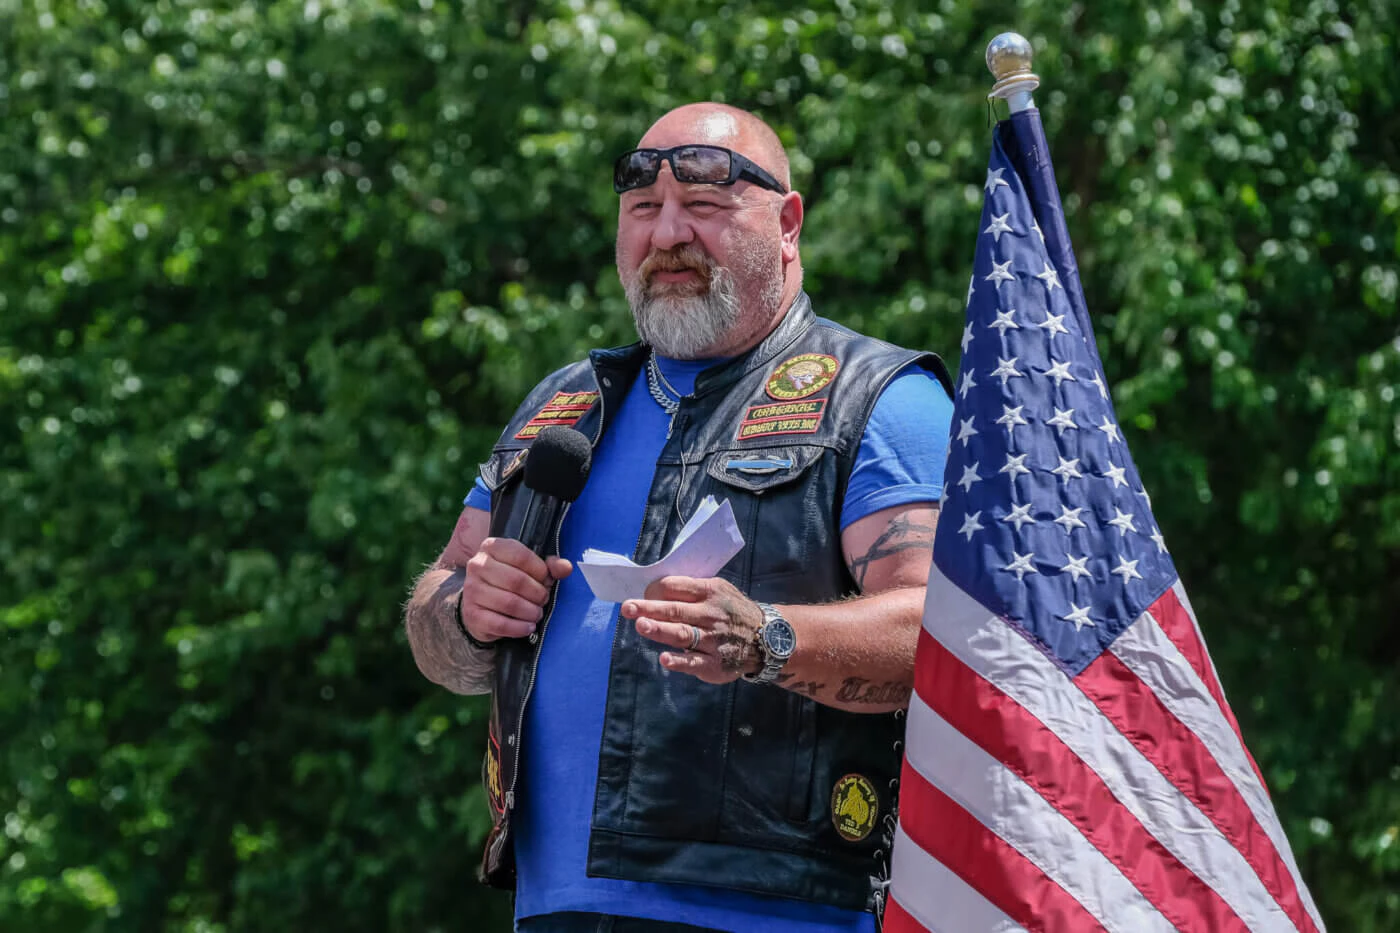 Teddy Daniels speaks during a pro-police rally in Milford on June, 20, 2020. (Photo by Preston Ehrler/SOPA Images/LightRocket via Getty Images)